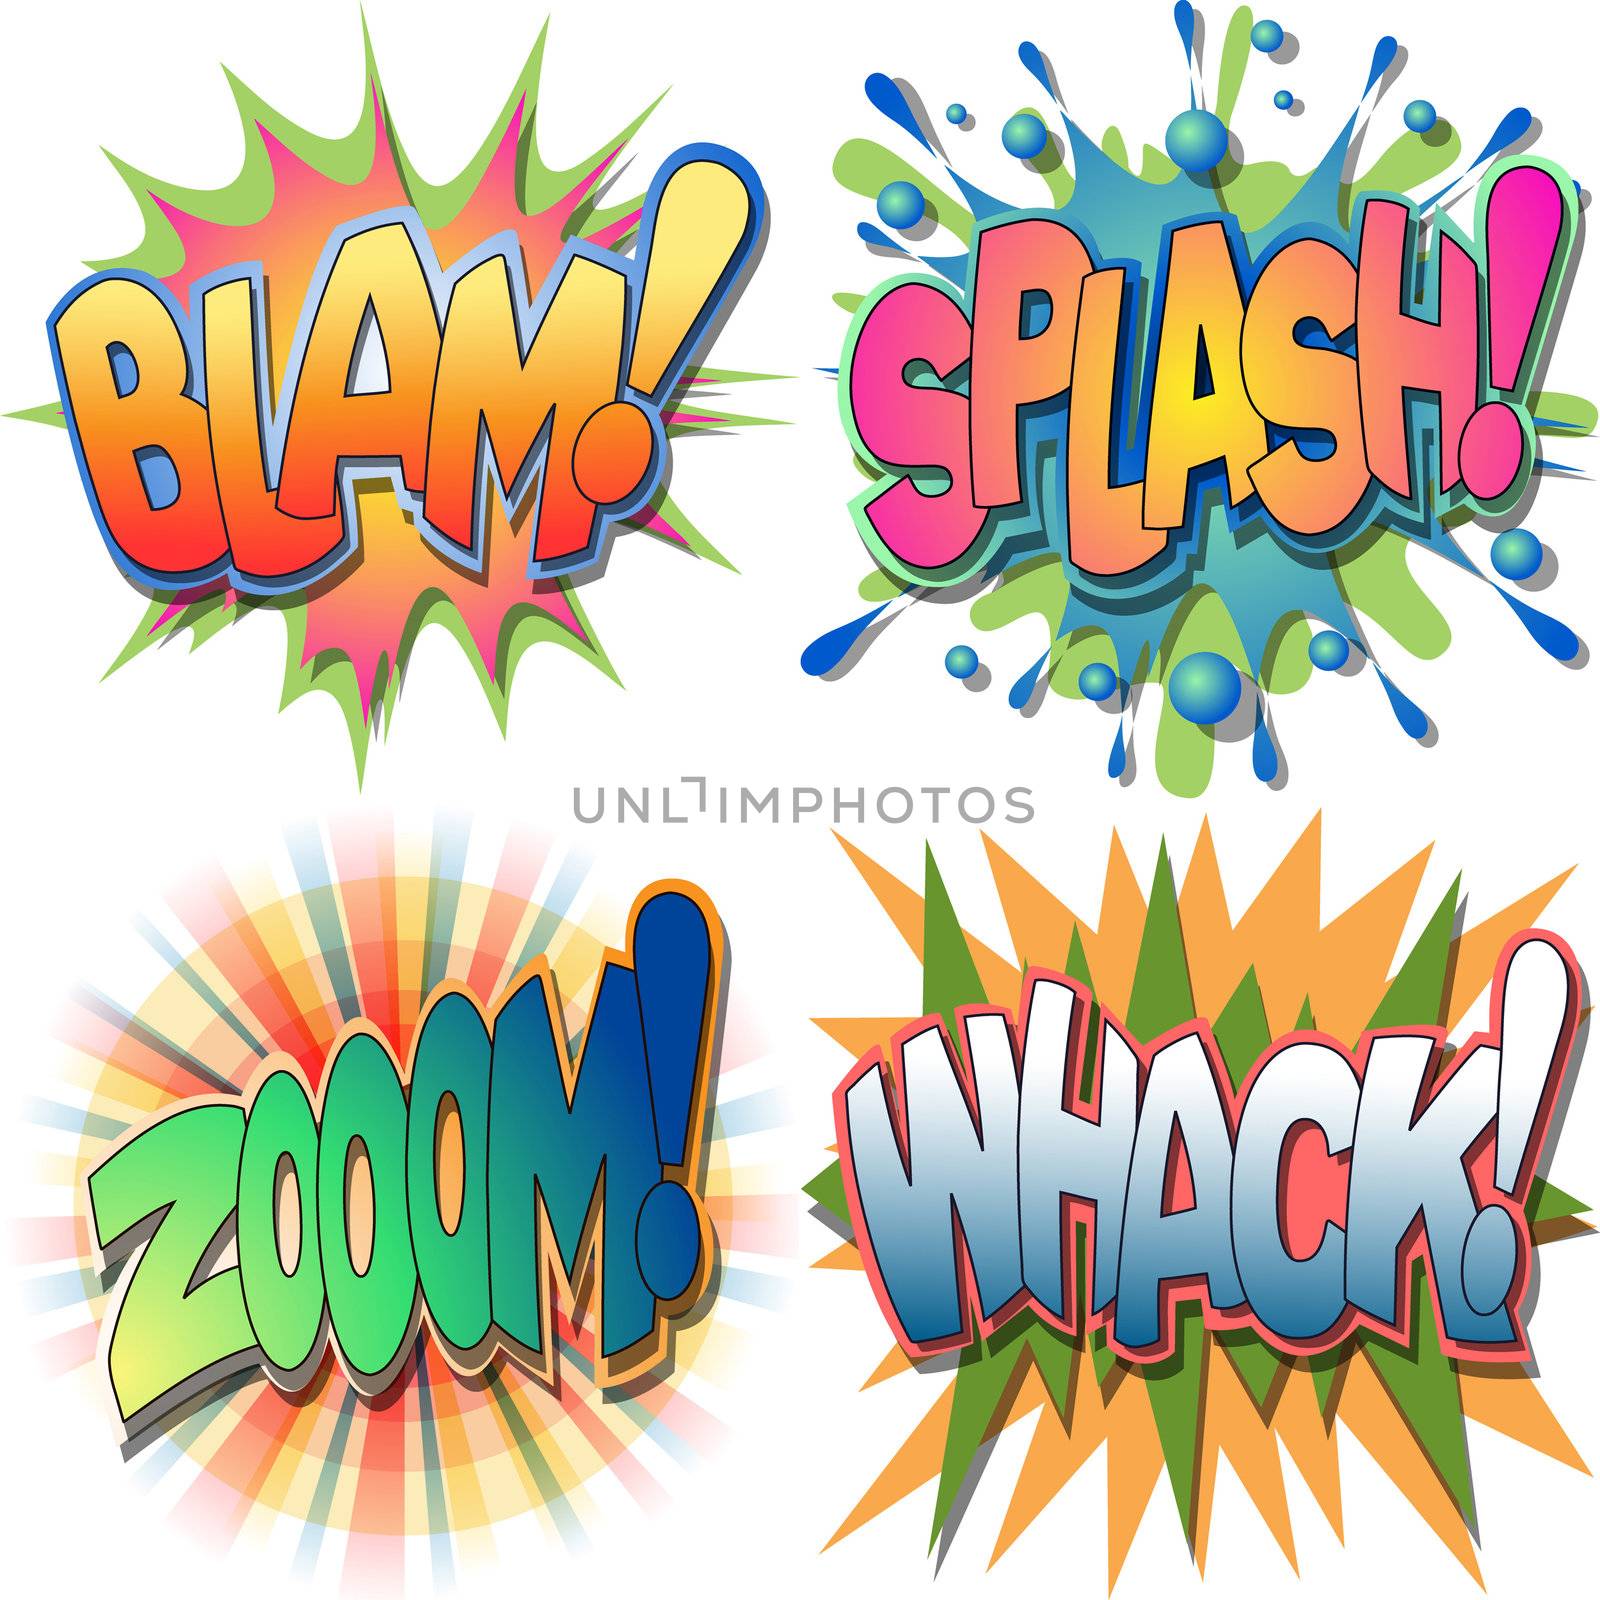 
A Selection of Comic Book Exclamations and Action Word Illustrations,Blam, Splash,Zoom, Whack